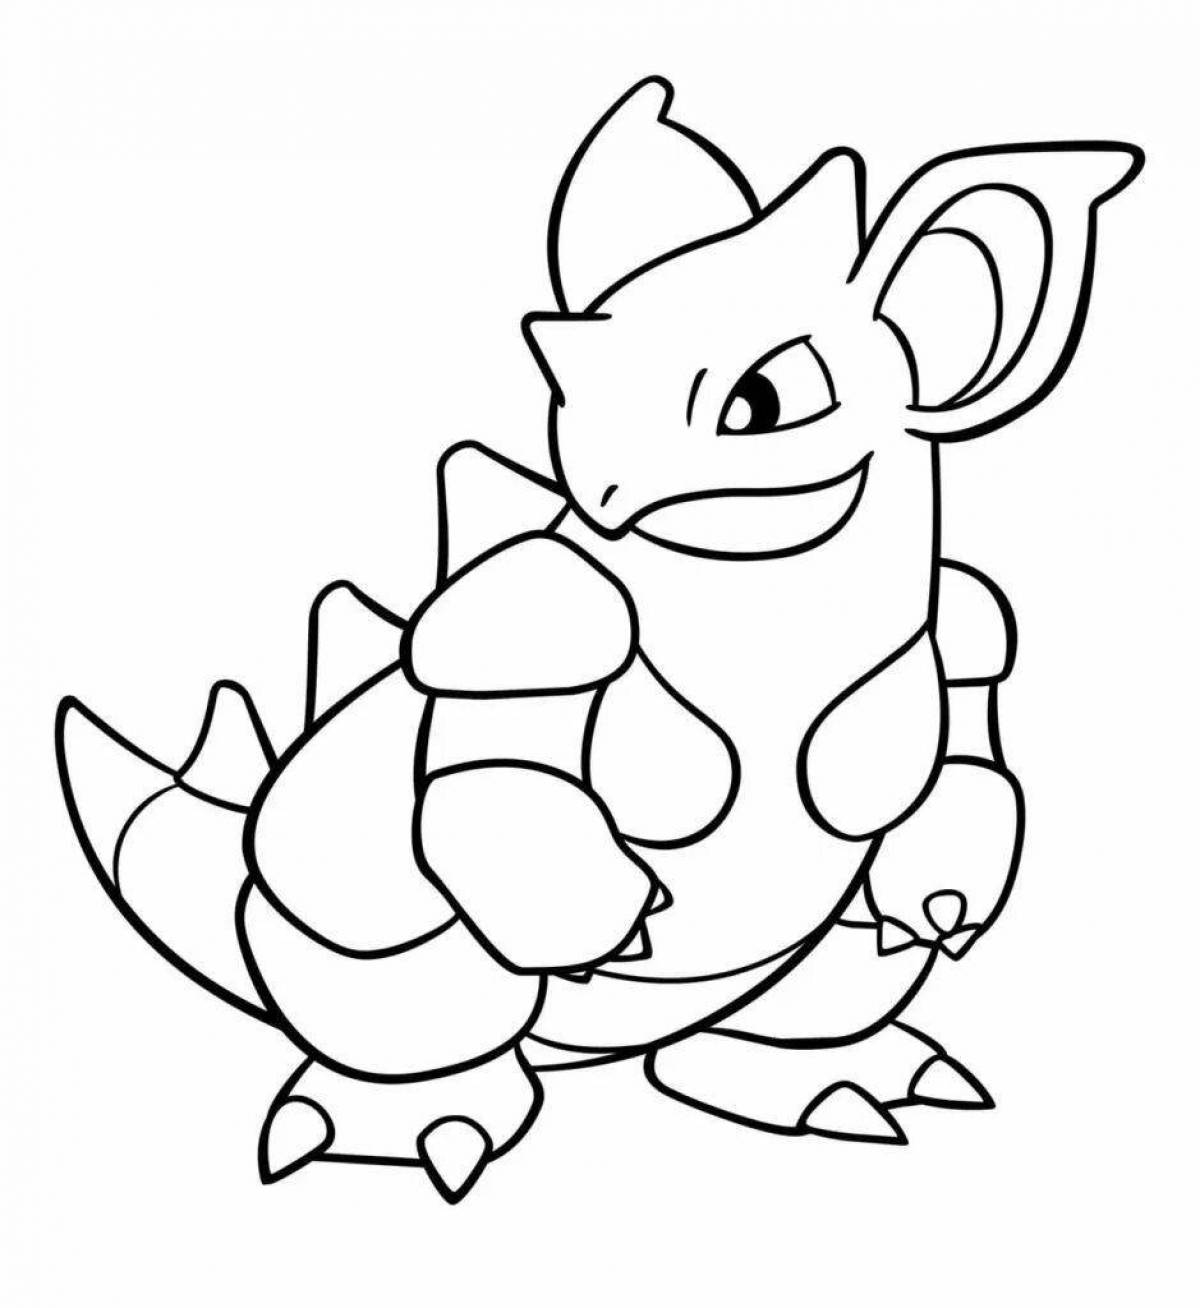 Good quality pokemon coloring page